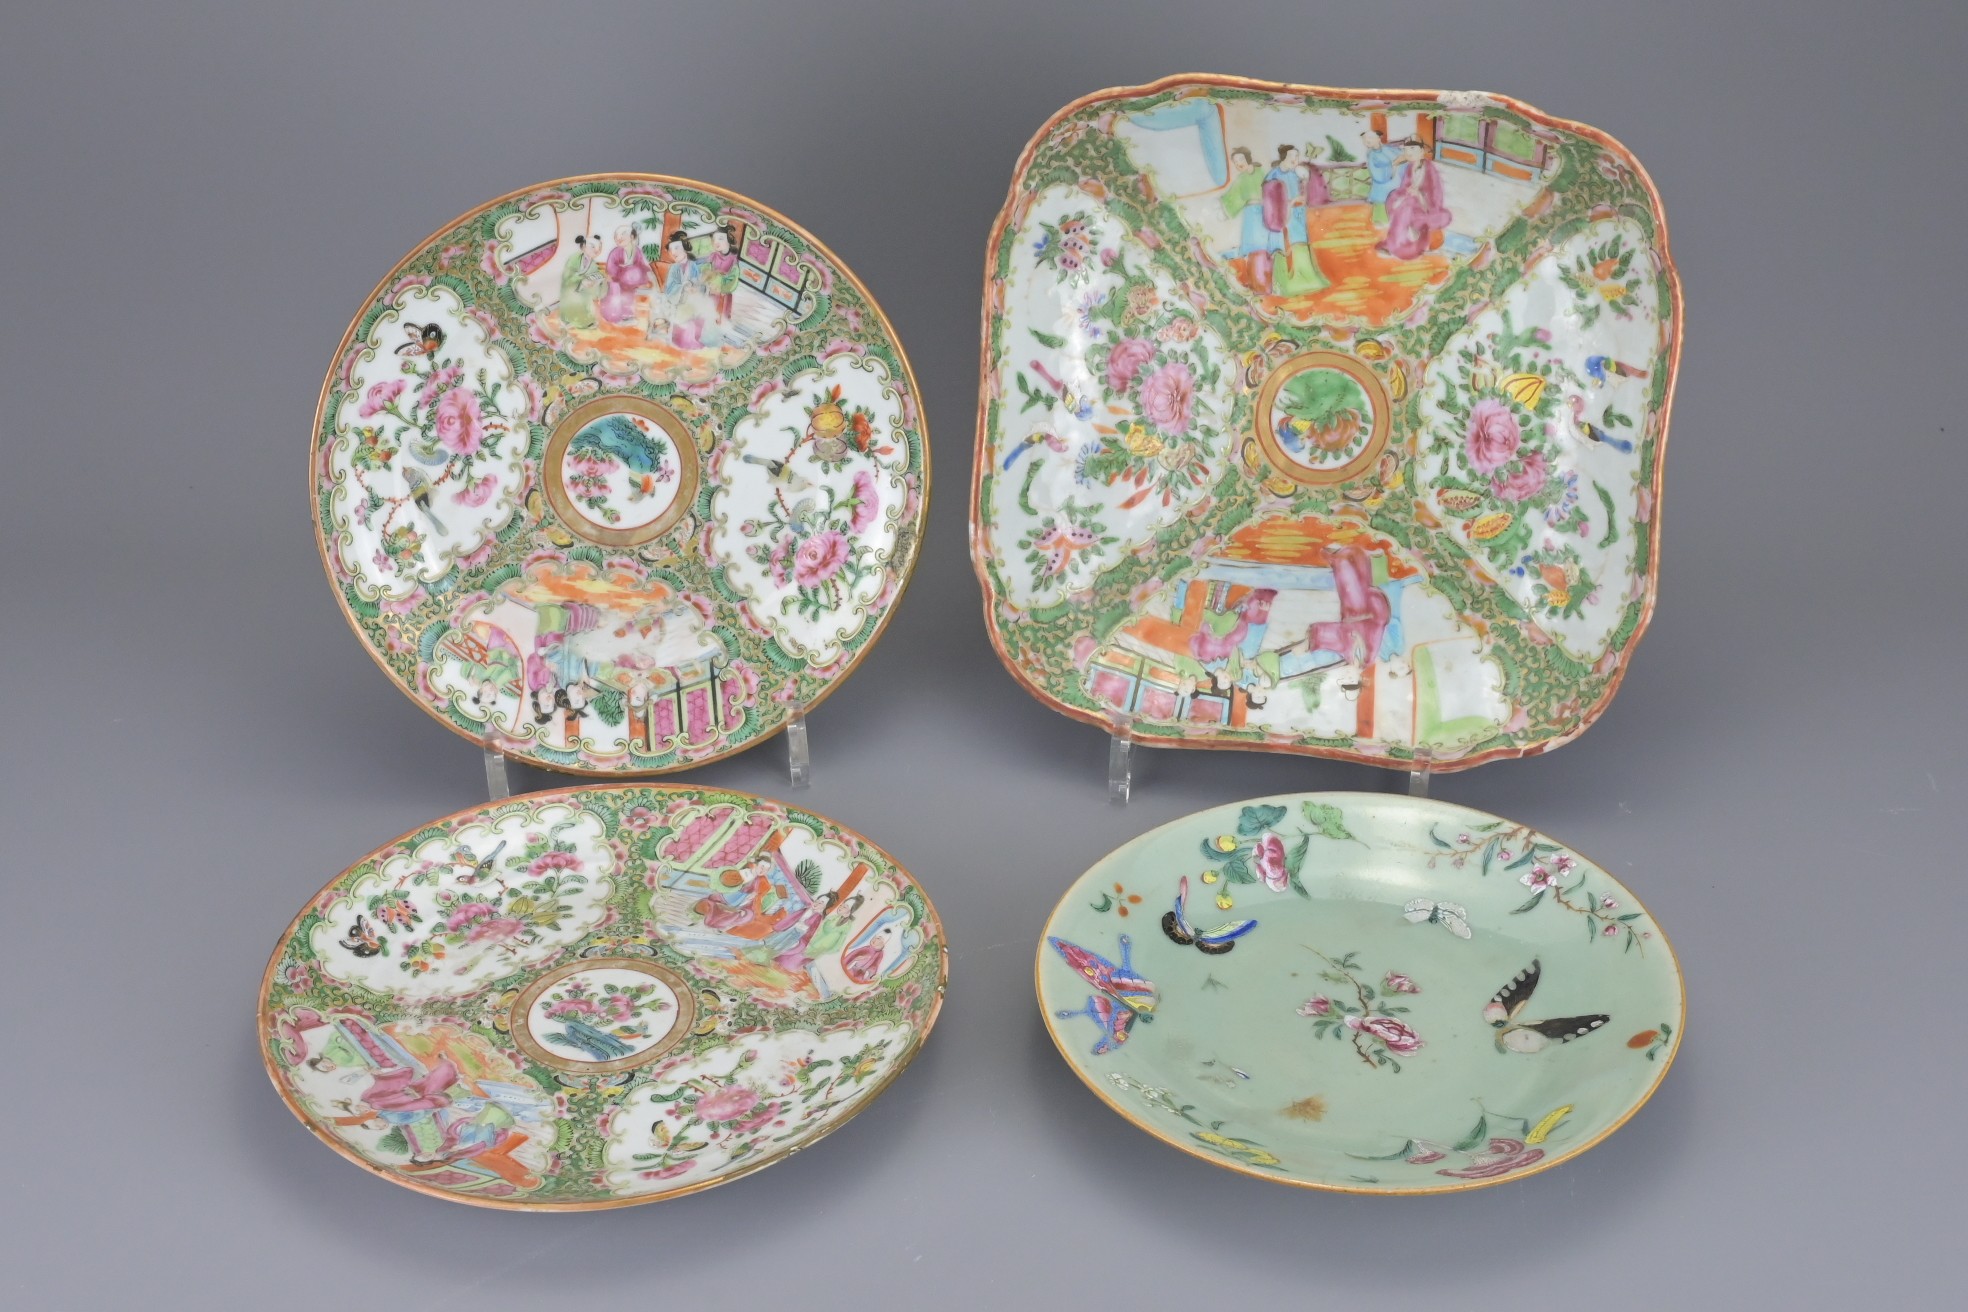 FOUR VARIOUS CANTONESE FAMILLE ROSE DISHES AND PLATES, 19TH CENTURY. Comprising a shaped square dish